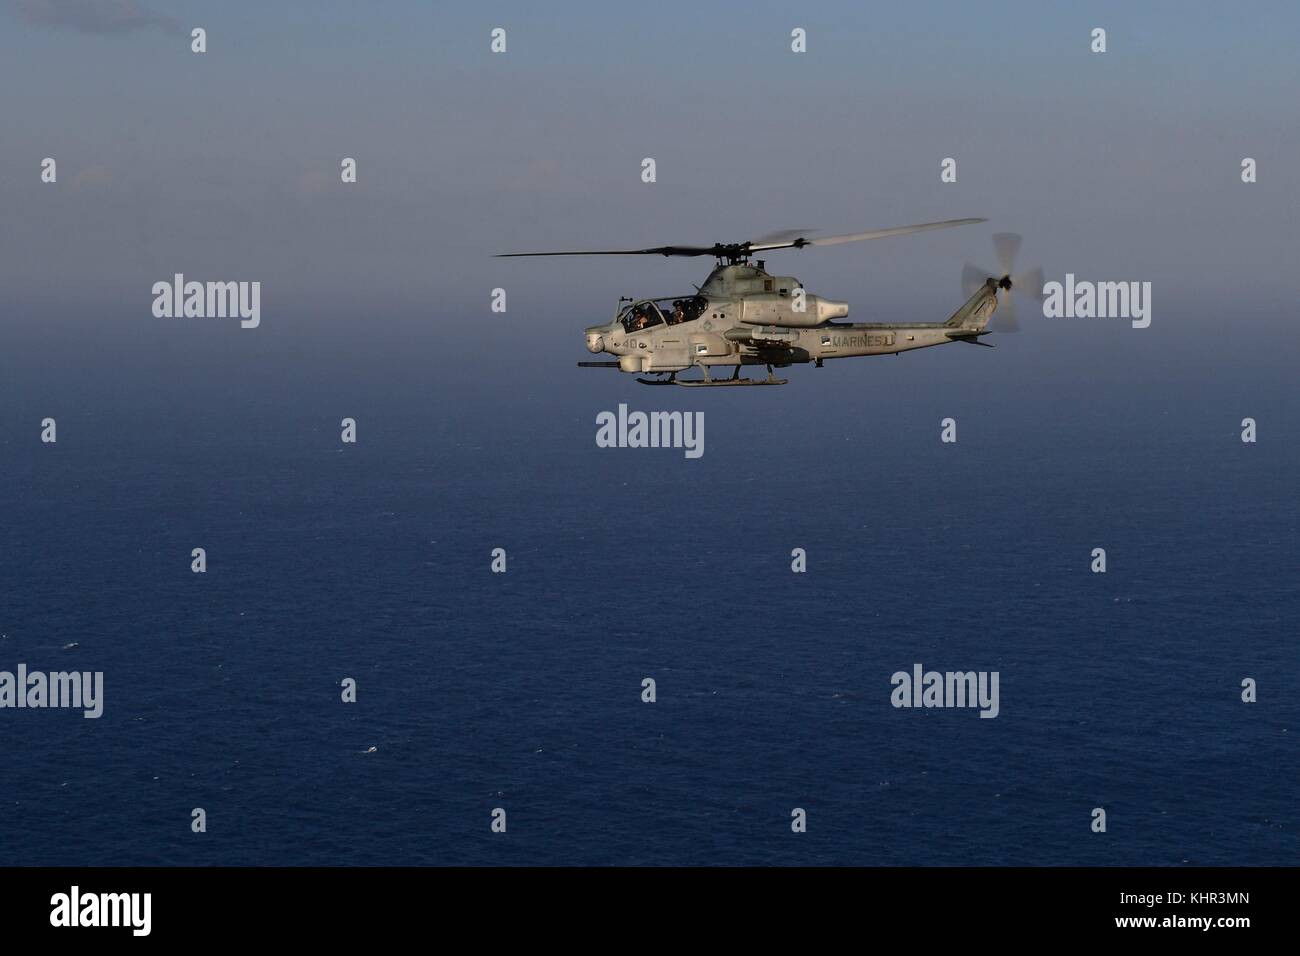 A U.S. Marine Corps AH-1Z Viper attack helicopter flies over the U.S. Navy San Antonio-class amphibious transport dock ship USS San Diego October 28, 2017 in the Mediterranean Sea.  (photo by Justin A. Schoenberger via Planetpix) Stock Photo